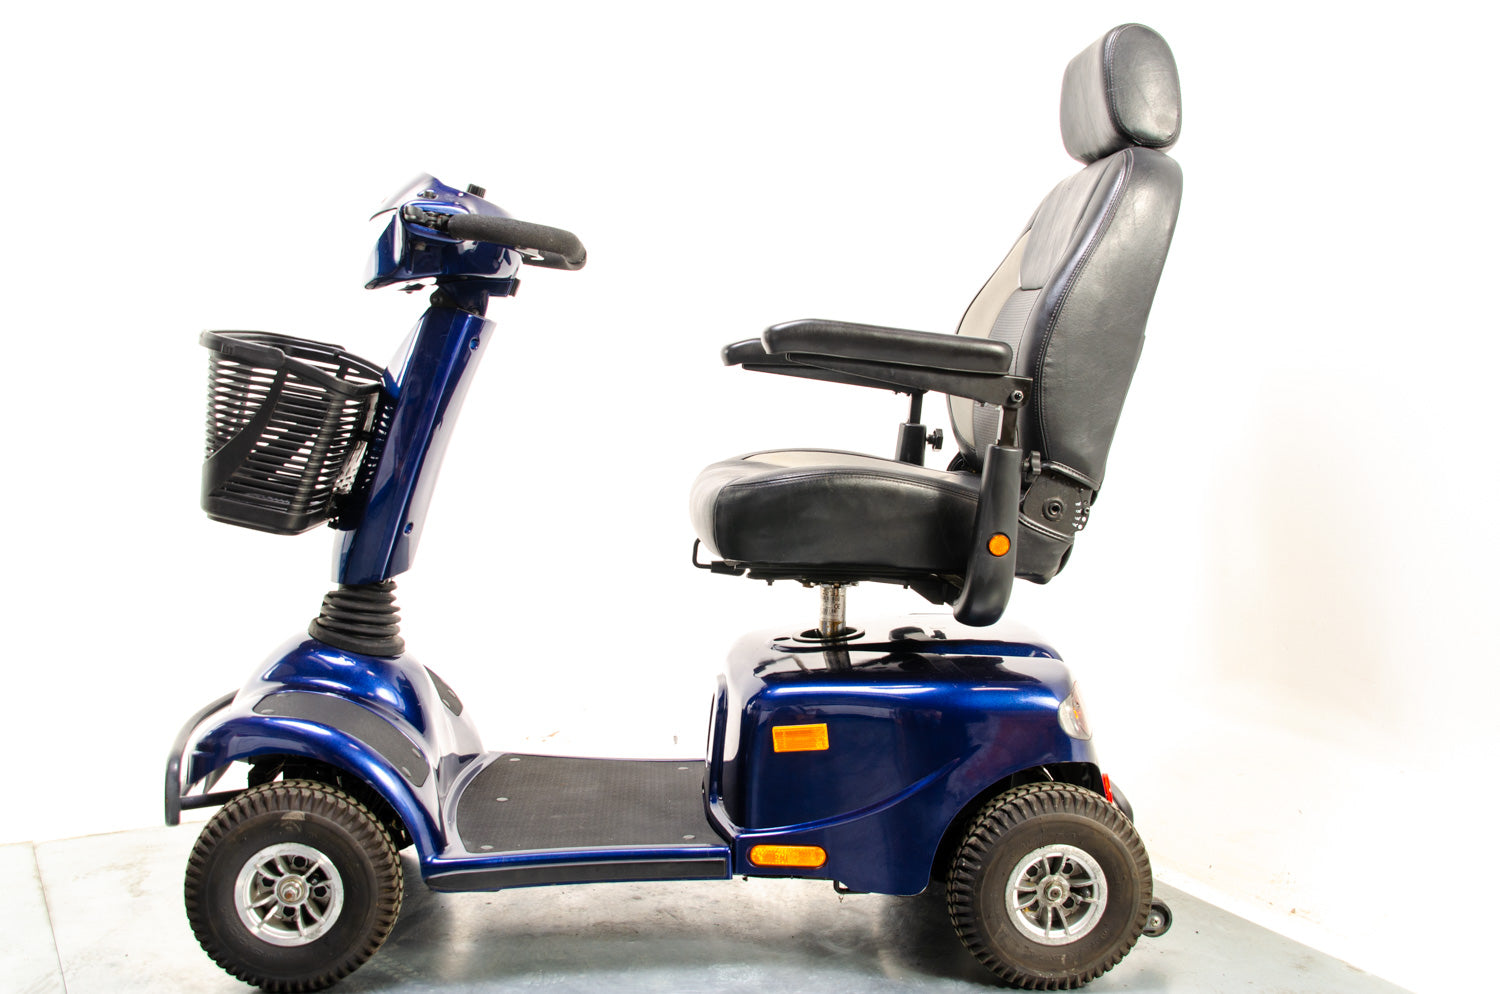 2012 Van Os Excite 4 8mph Large Size Mobility Scooter In Blue